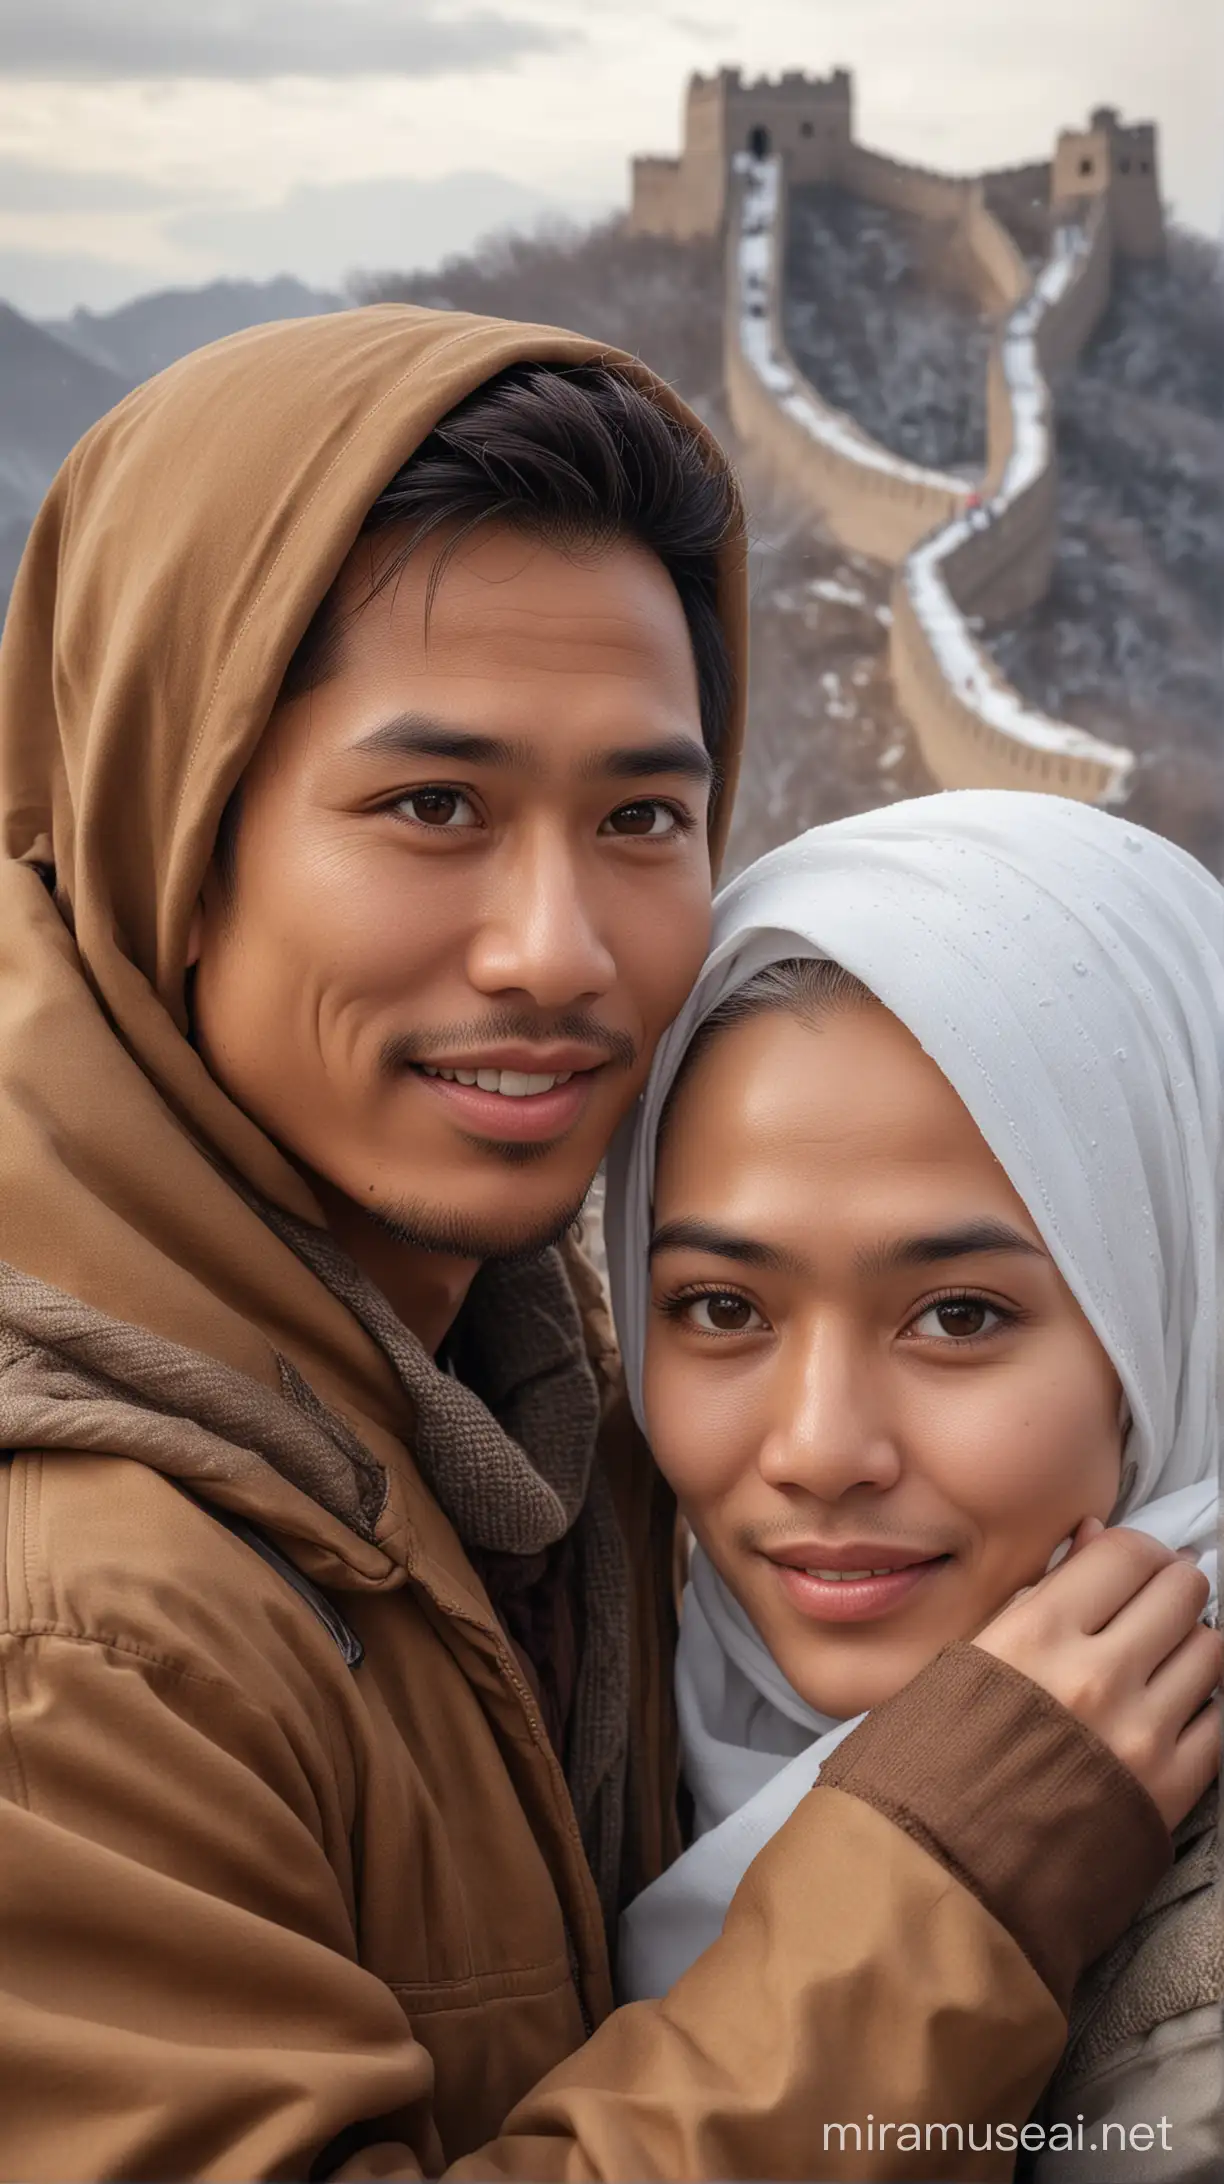 Generate IMG, ((8K, RAW Photo, Photography, Photorealistic, Highest Quality, Intricate Details)), Medium shot, of A 30 year old Indonesian man (medium hair, wearing brown winter jacket  ), embracing a 30 year old beautiful indonesian woman (with white hijab, white winter jacket), they smile facing the camera, standing in the chinese great wall, cloudy, 800mm lens, ultra HD, HDR photo, very detailed, ultra sharp, nature photo, masterpiece, shot with hasselblad x2d